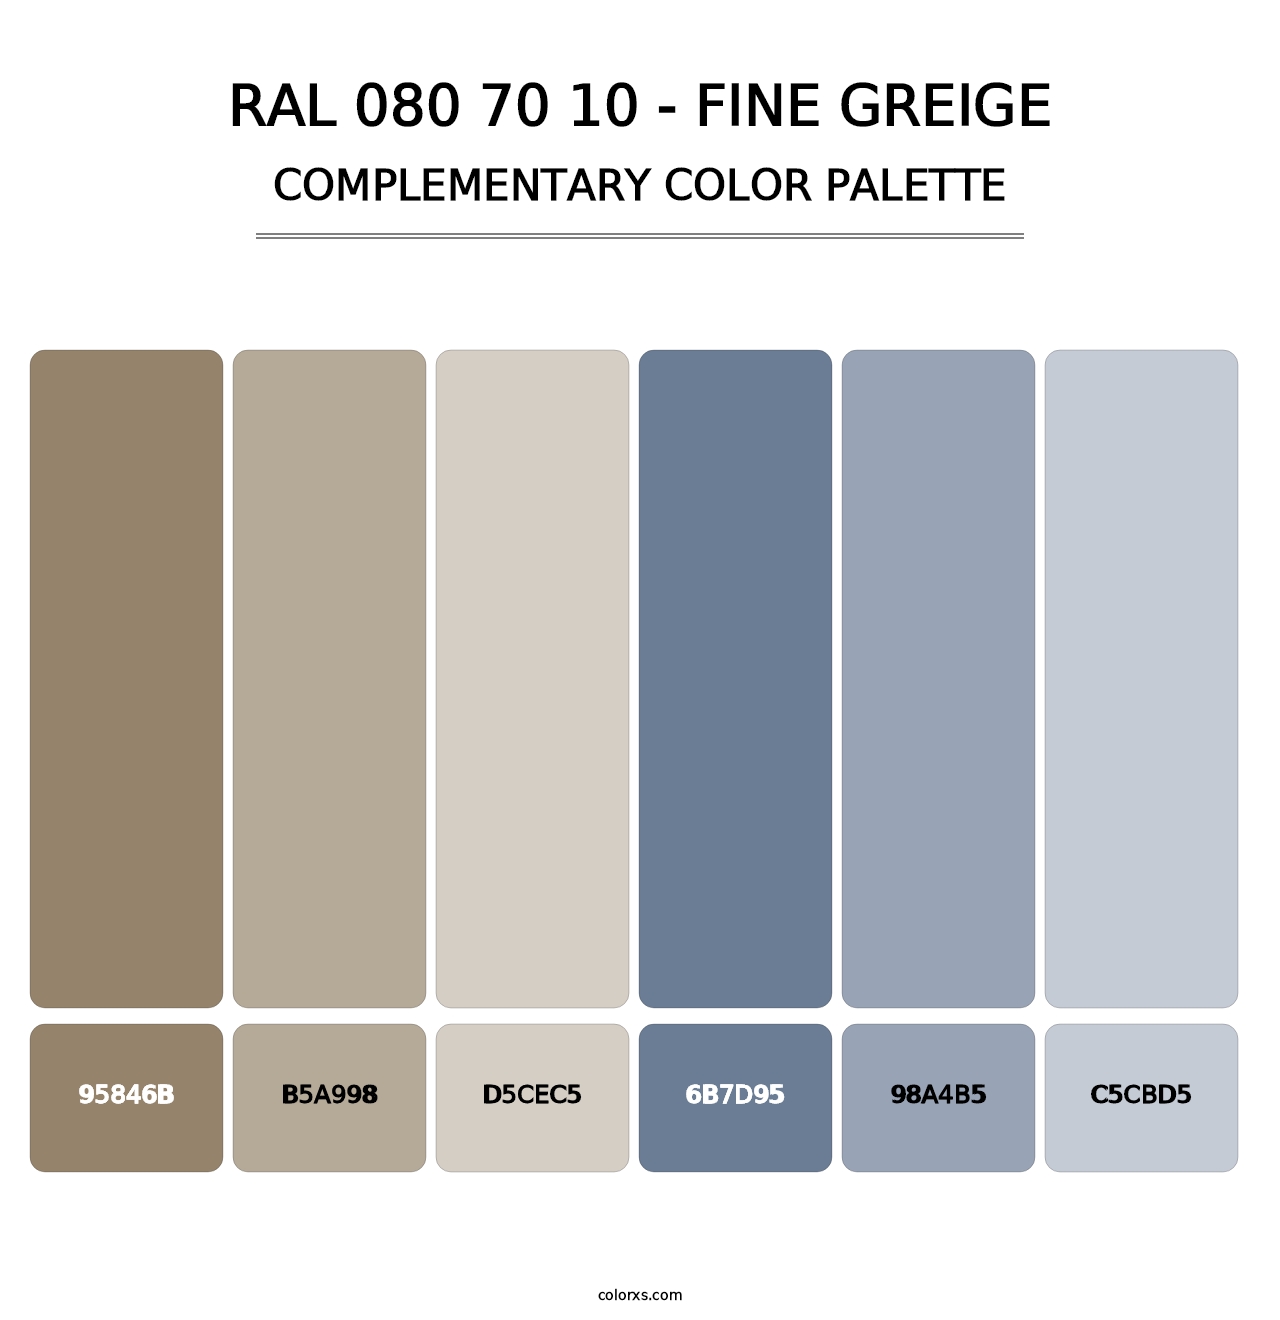 RAL 080 70 10 - Fine Greige - Complementary Color Palette